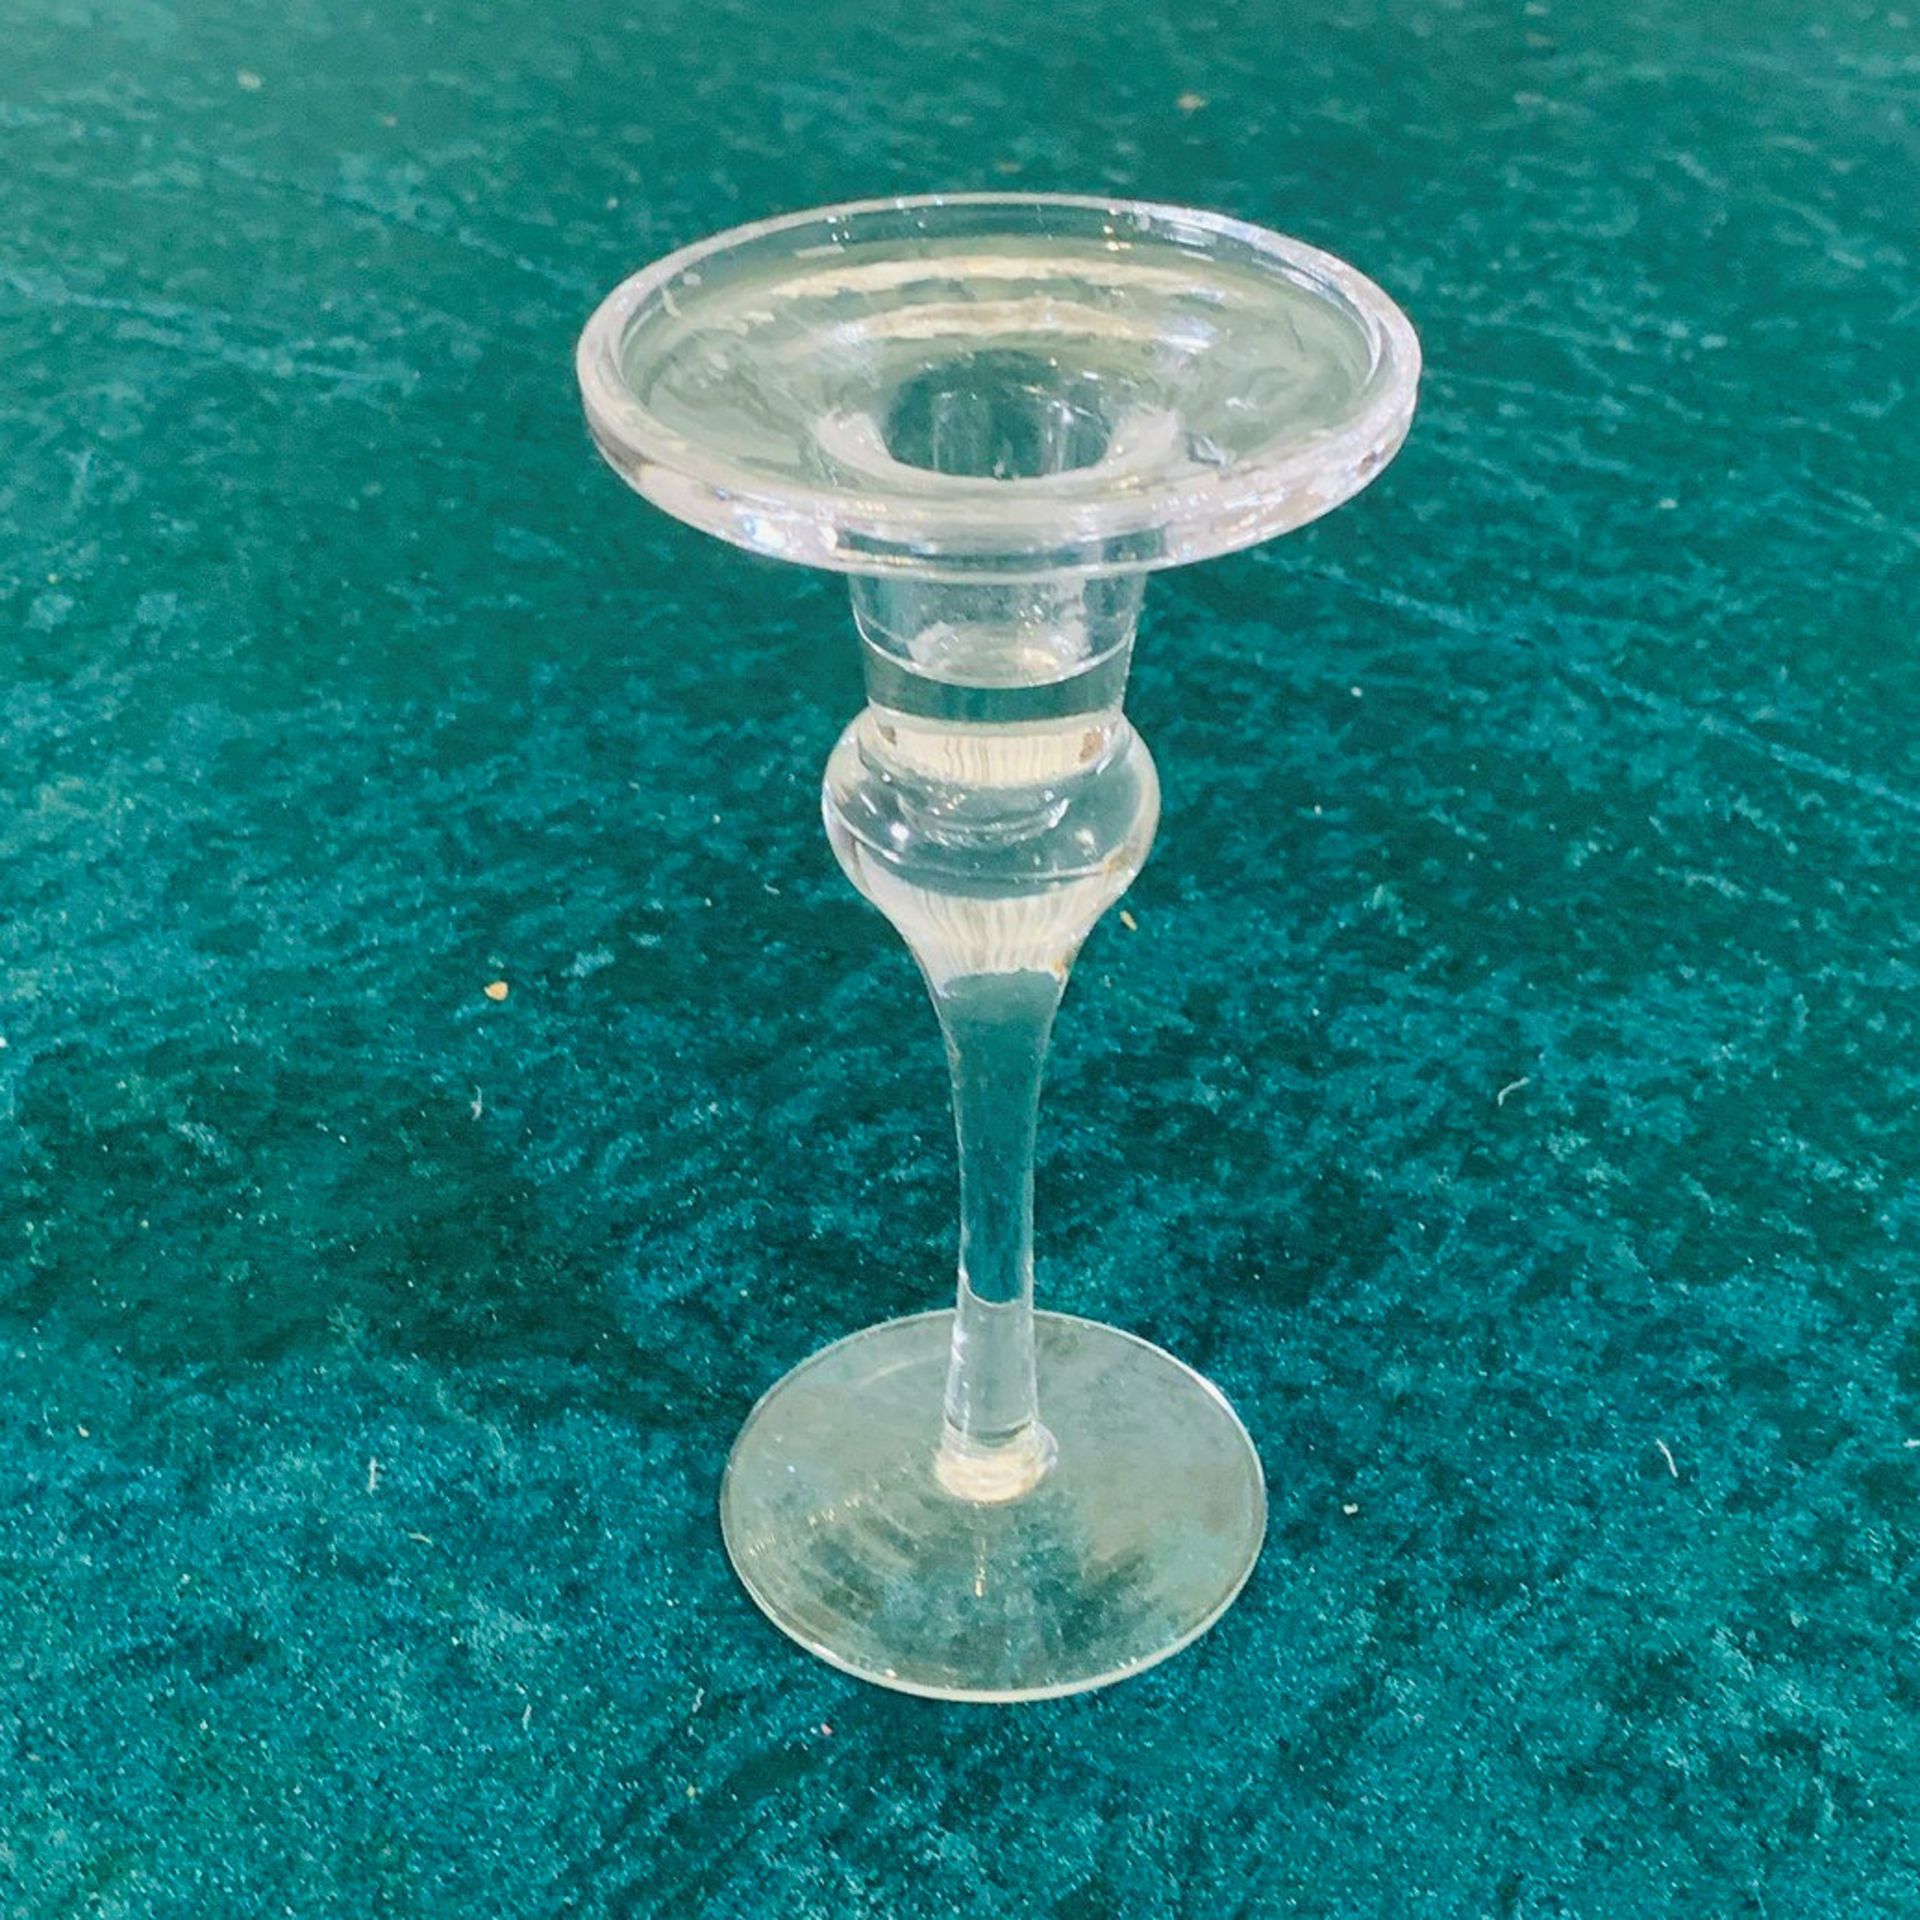 12 x Small Glass Candlestands - Dimensions: 17x9cm - Ref: Lot 40 - CL548 - Location: Leicester